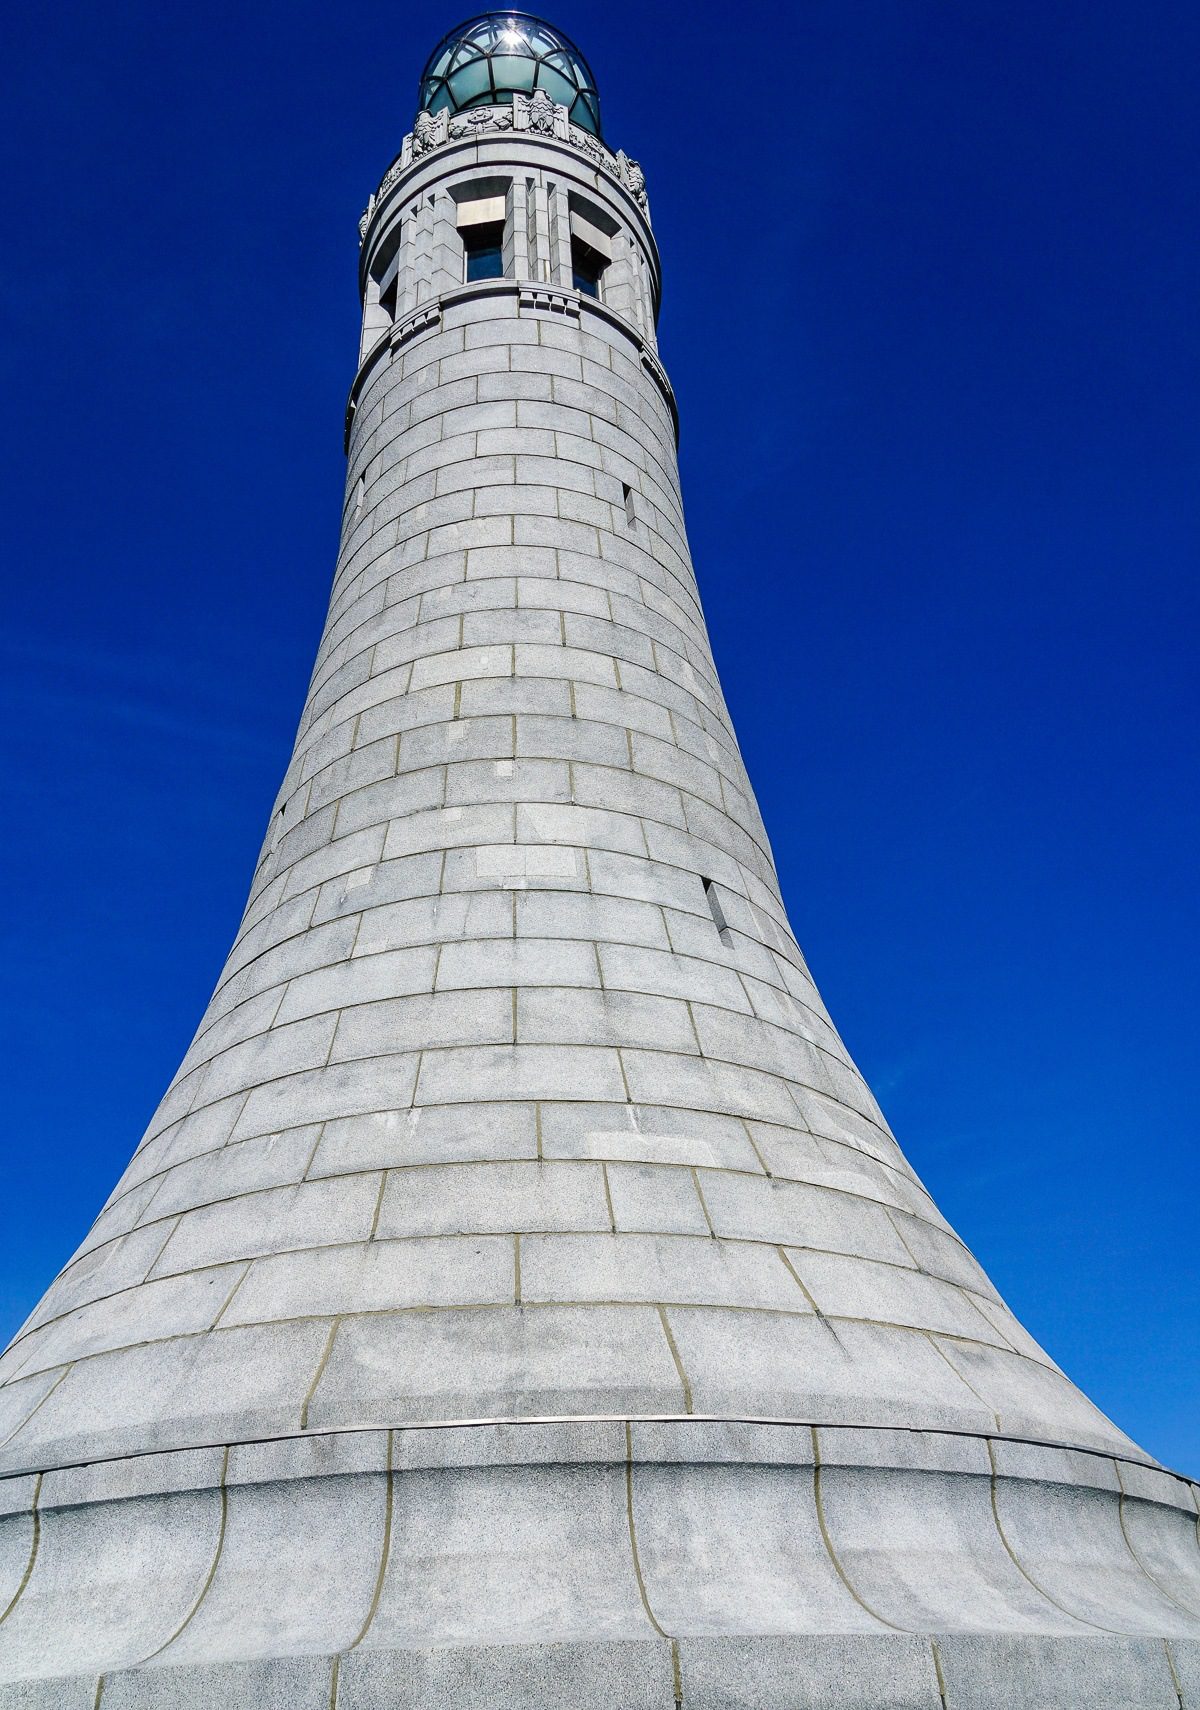 Planning travel to Mount Greylock, the highest point in Massachusetts? Here's the easiest way up the mountain to see great New England views, even with young kids. Pictured: the Veterans War Memorial Tower. 